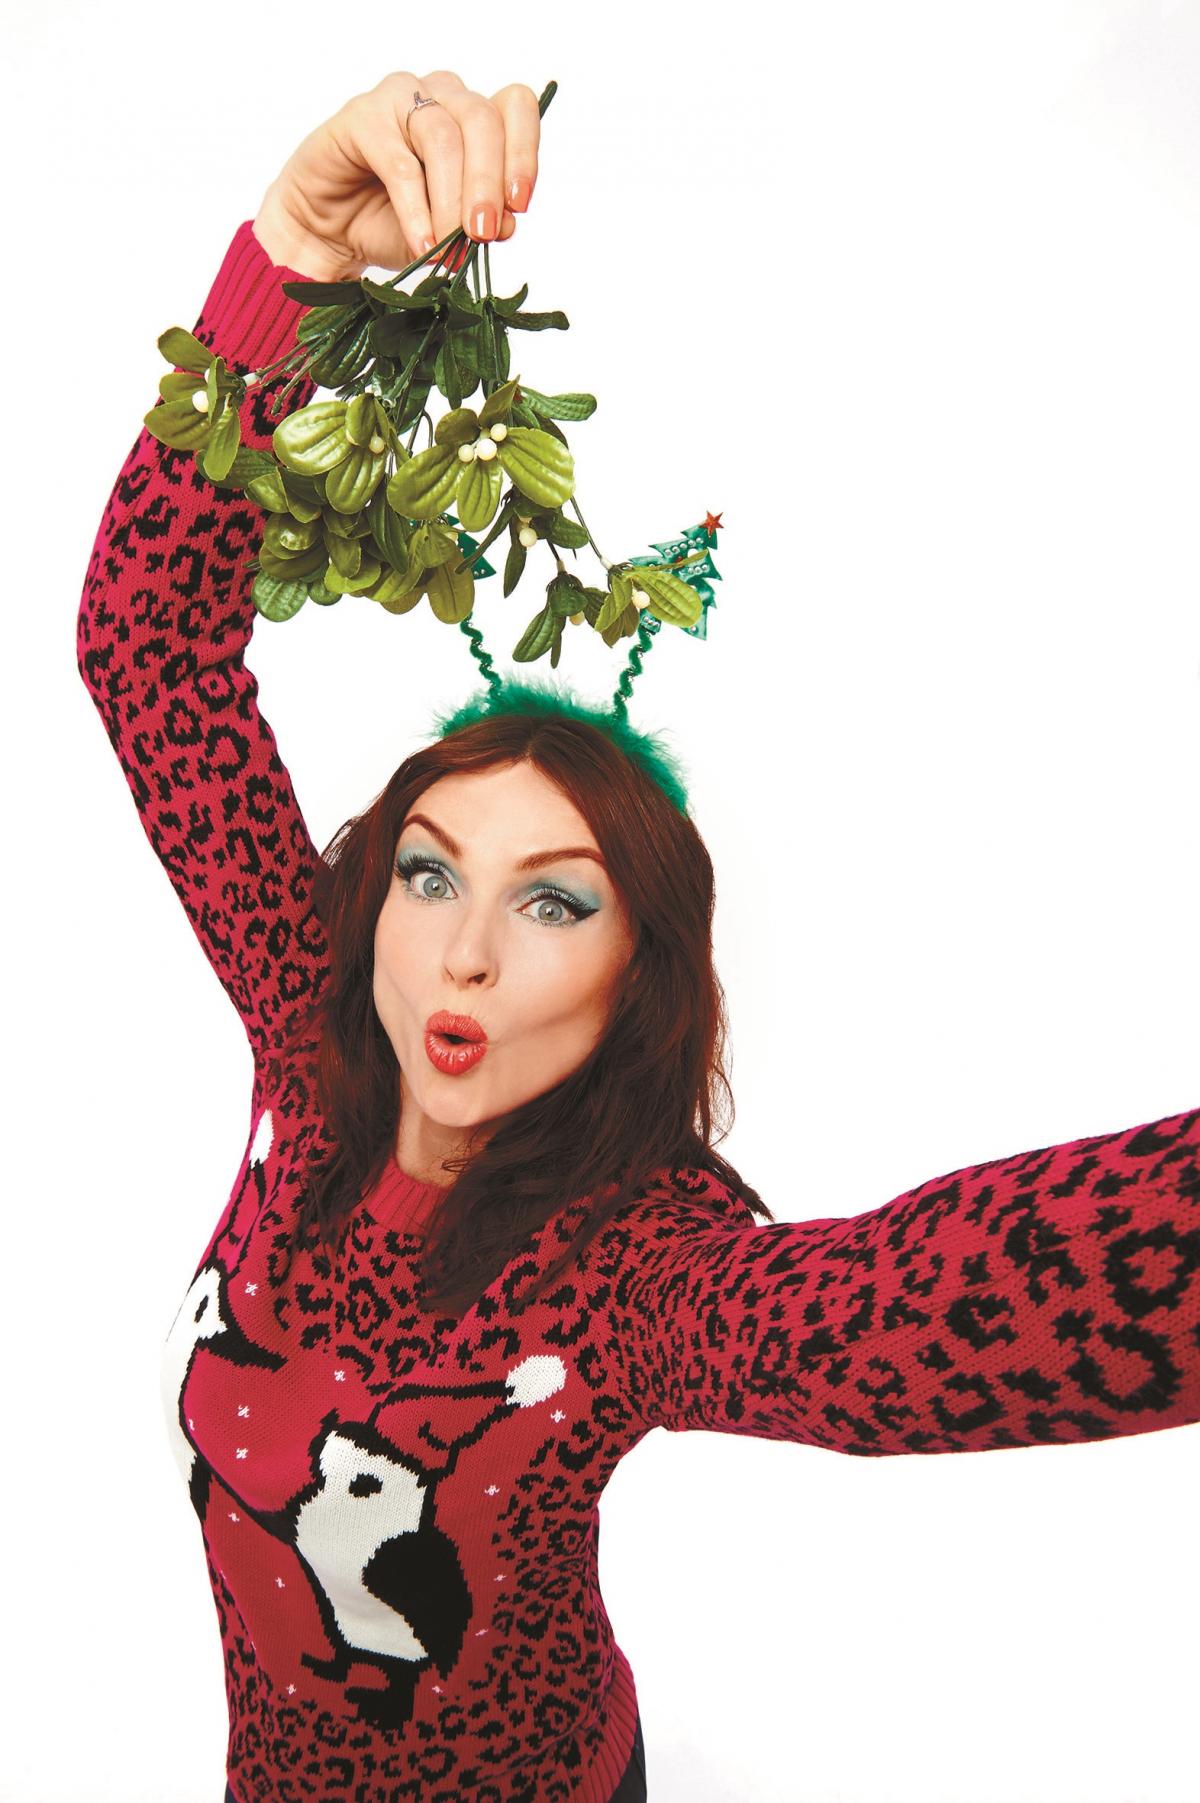 Sophie Ellis Bextor is just one of the many celebrities supporting the charity day.